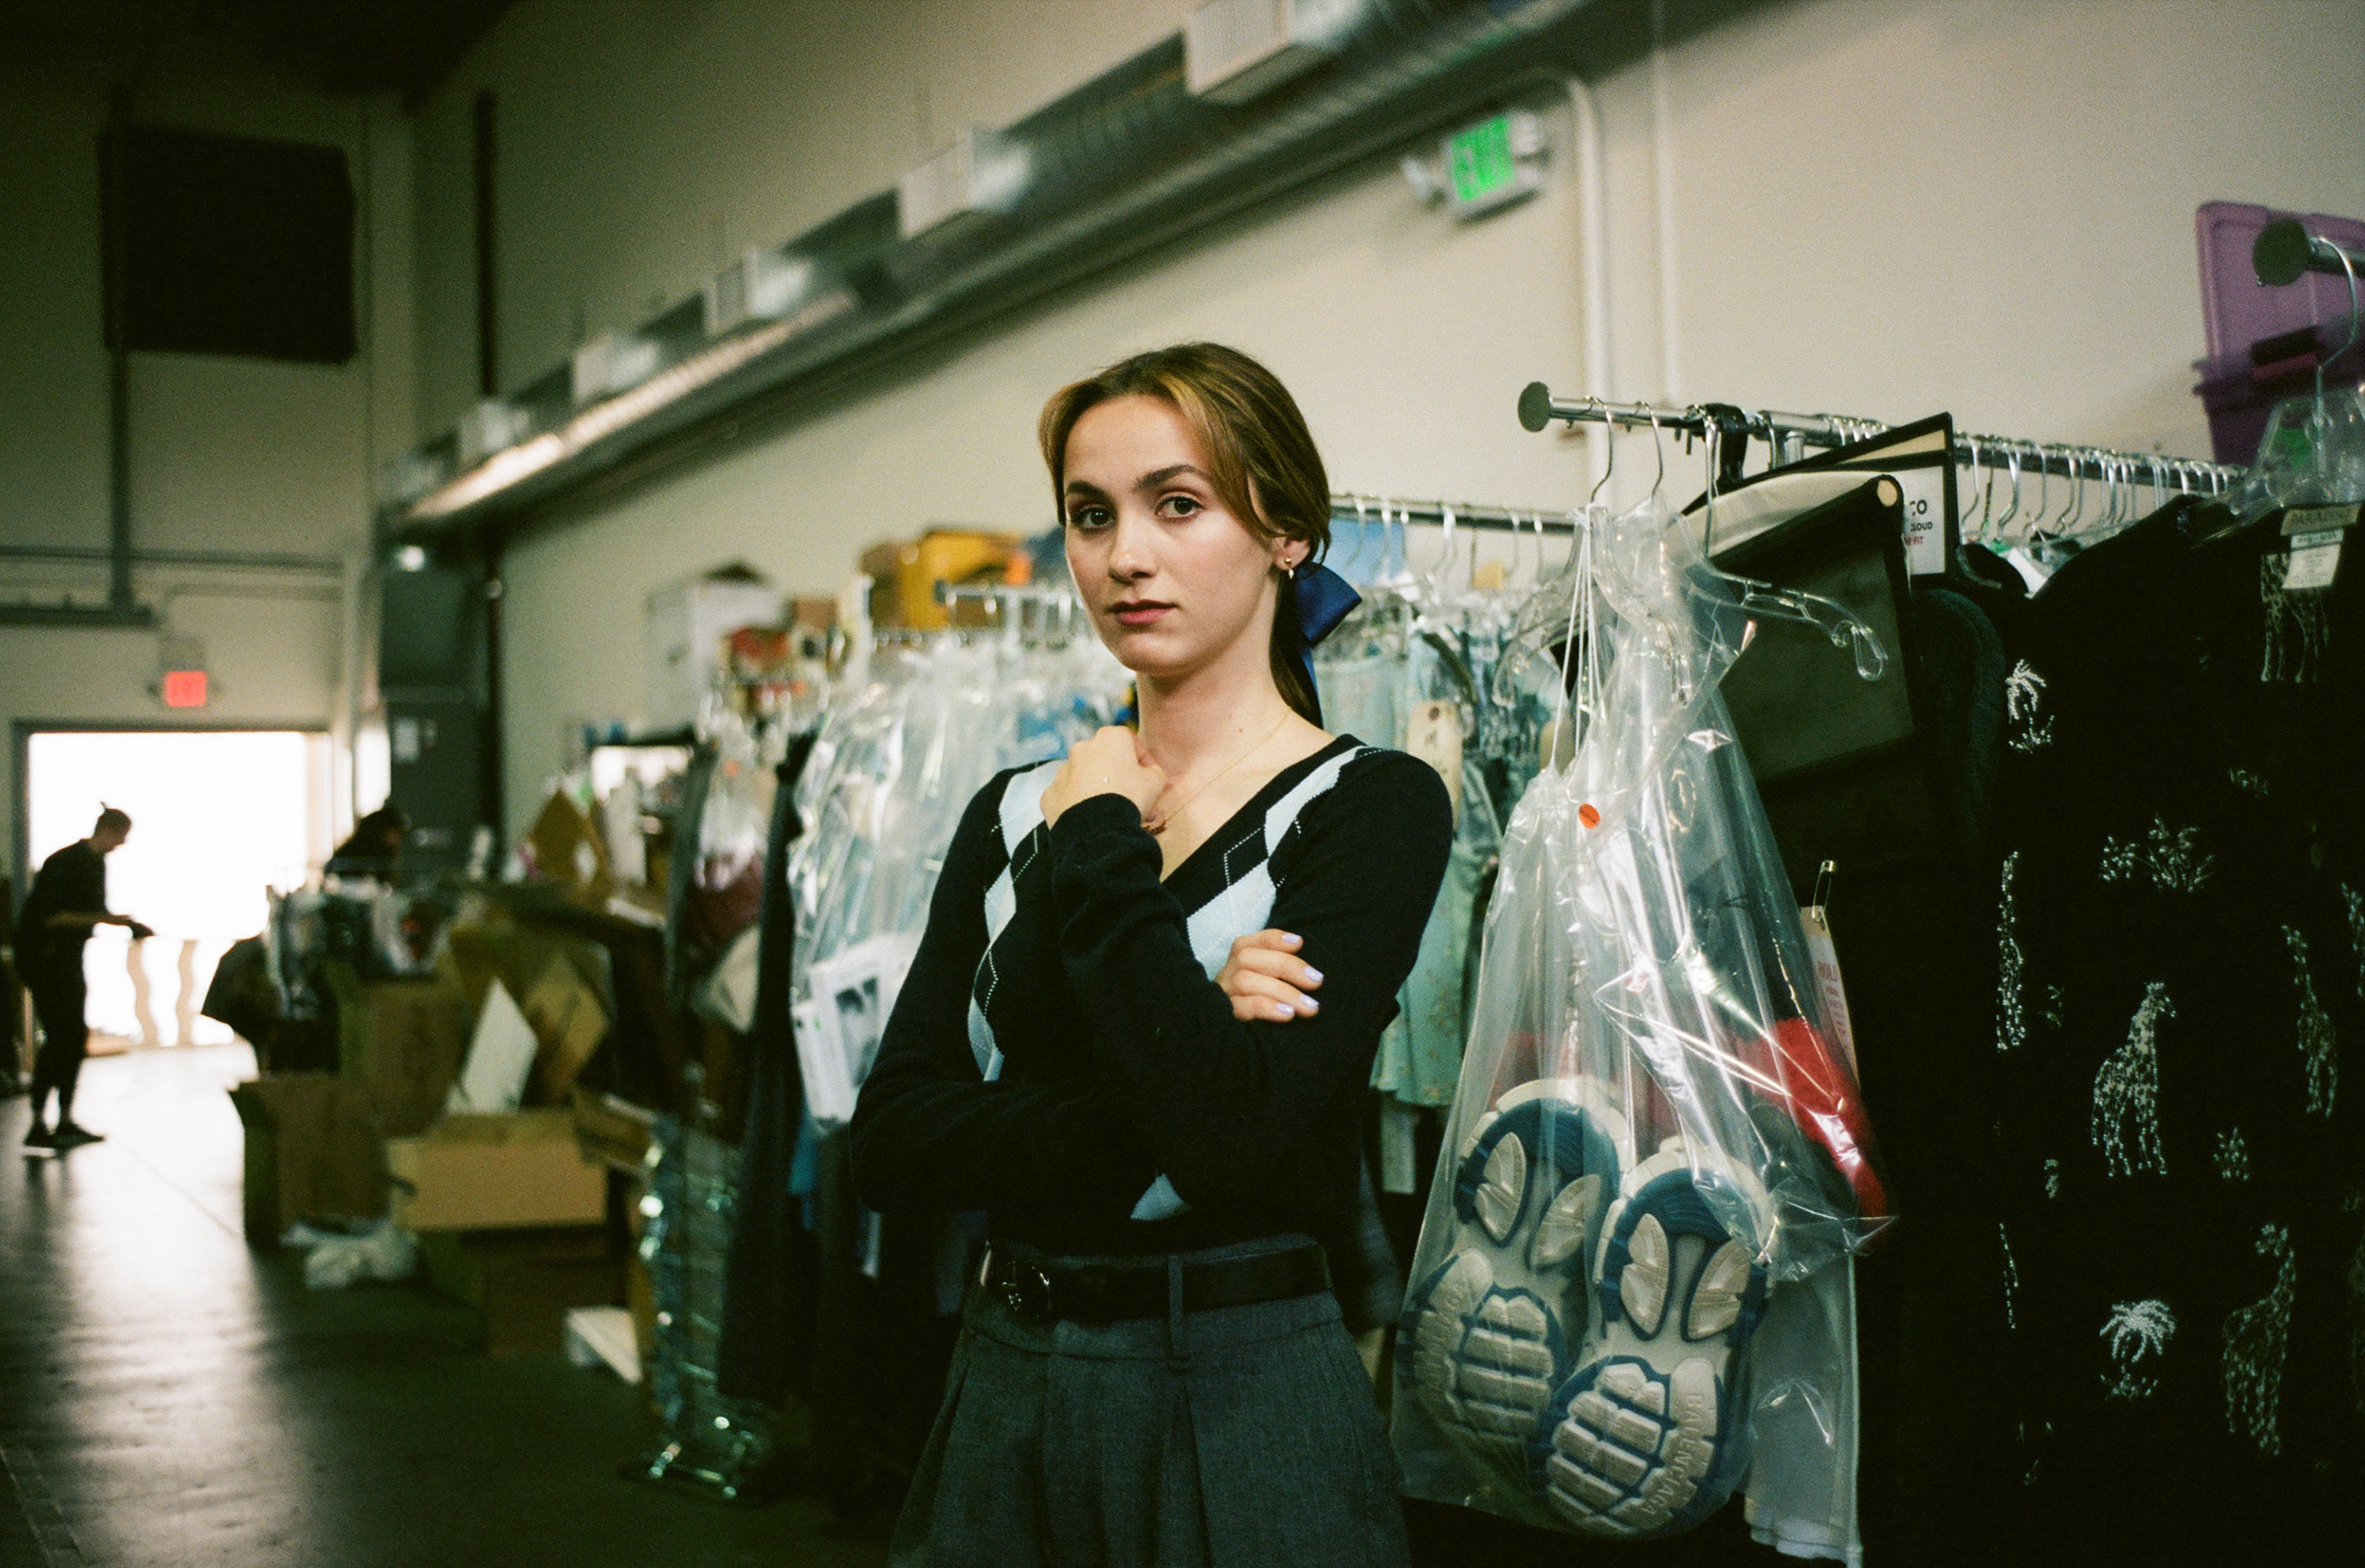 Maude Apatow on set in front of costumes